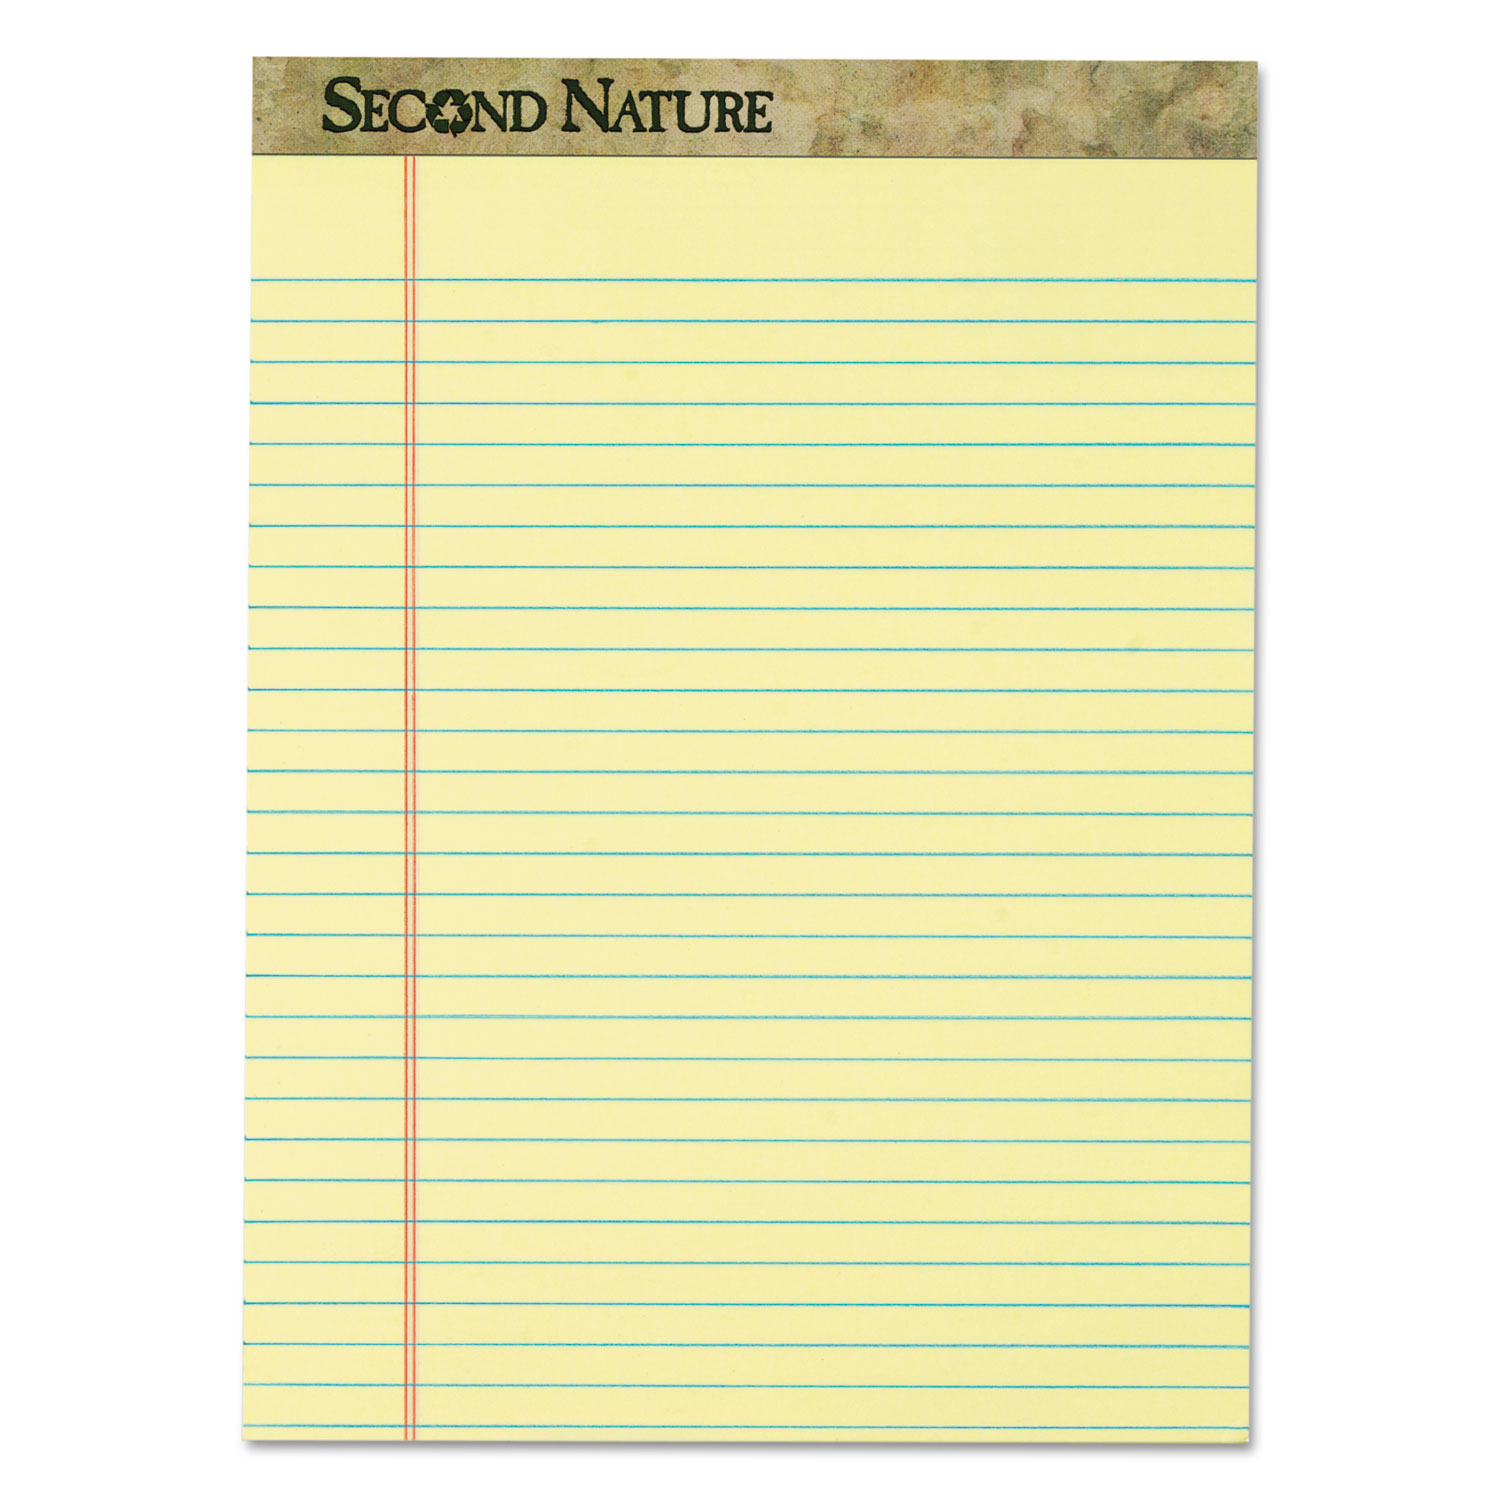 Second Nature Recycled Pads, 8 1/2 x 11 3/4, Canary, 50 Sheets, Dozen